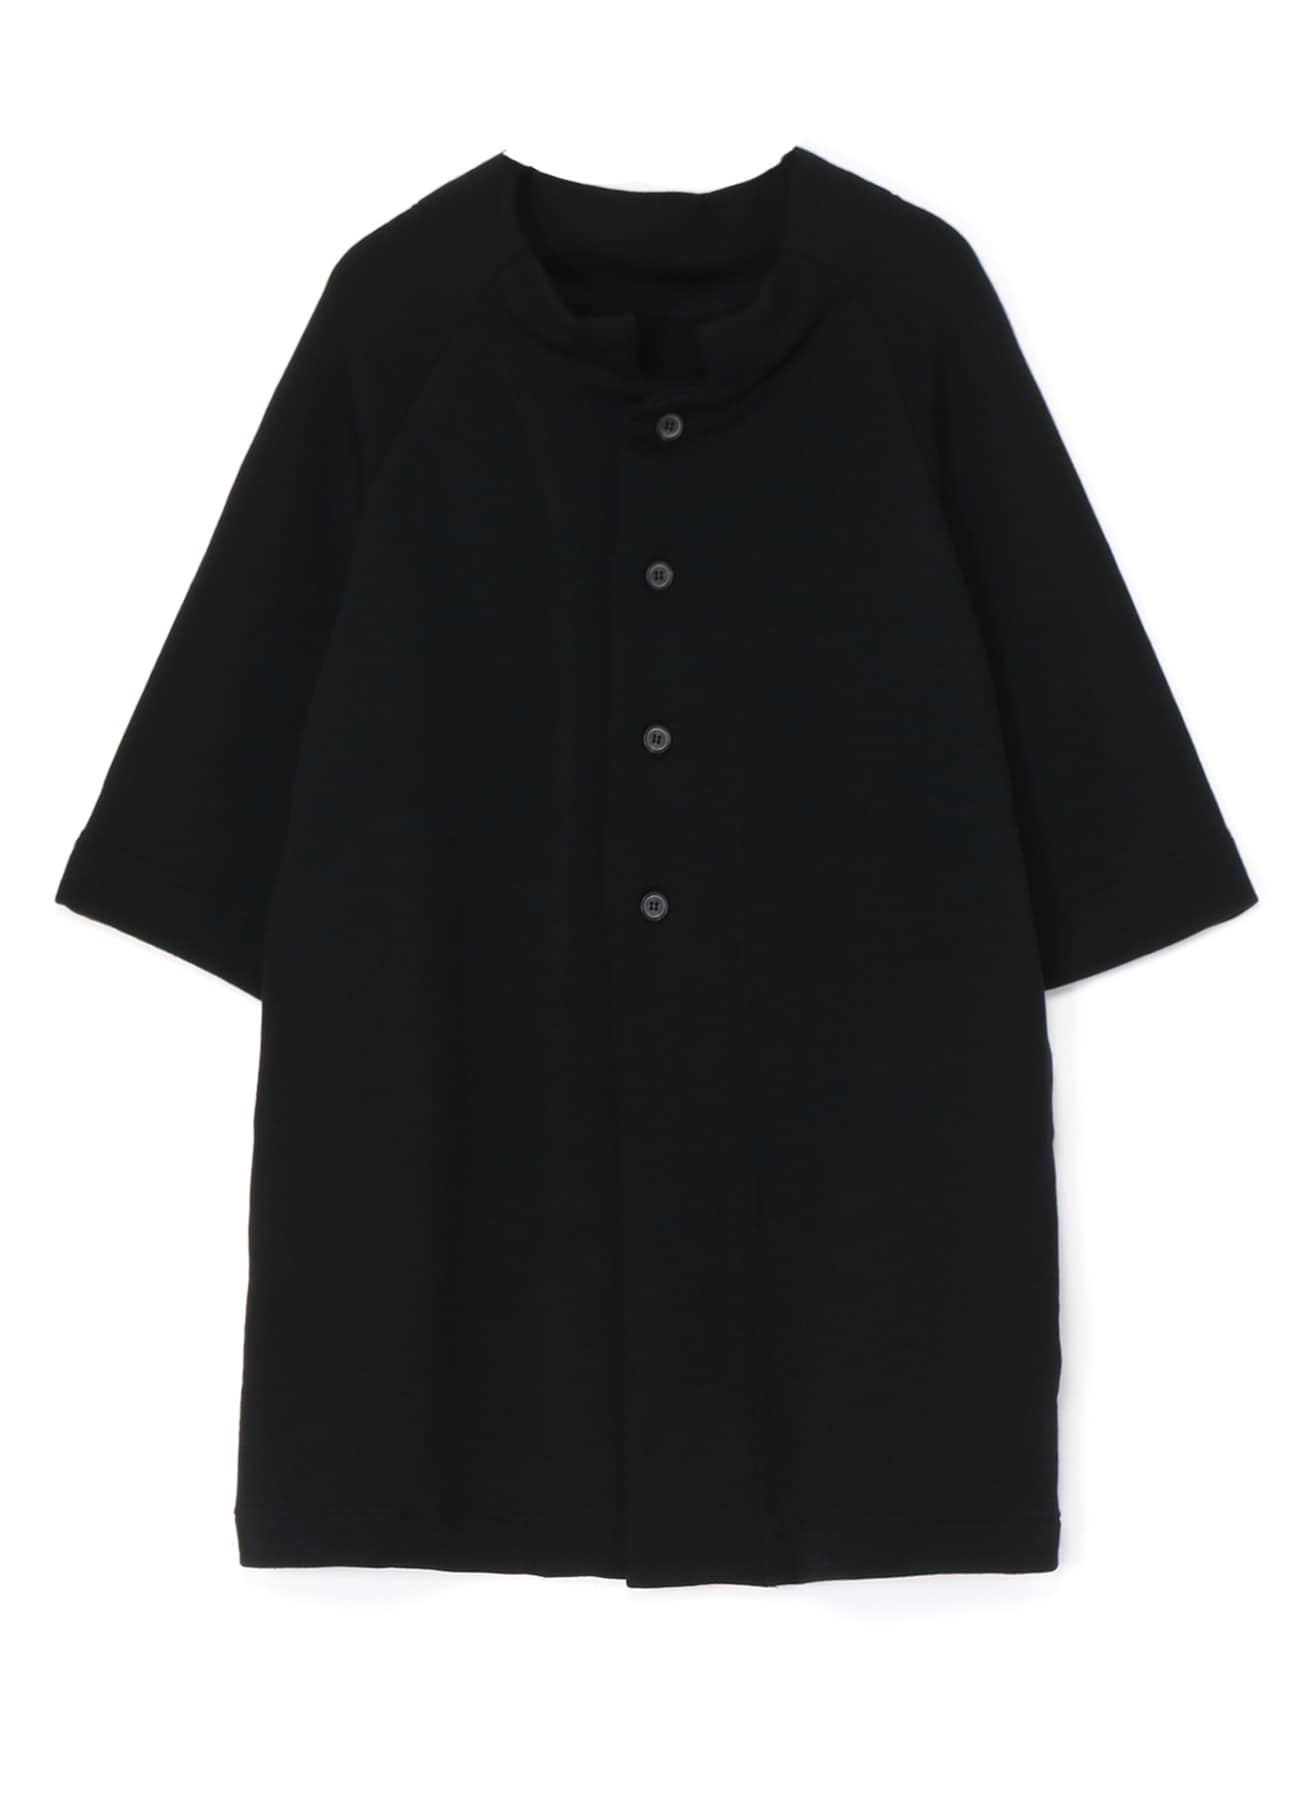 COTTON/LYOCELL FRENCH TERRY RAGLAN OVERSIZED COAT(S Black): Y's